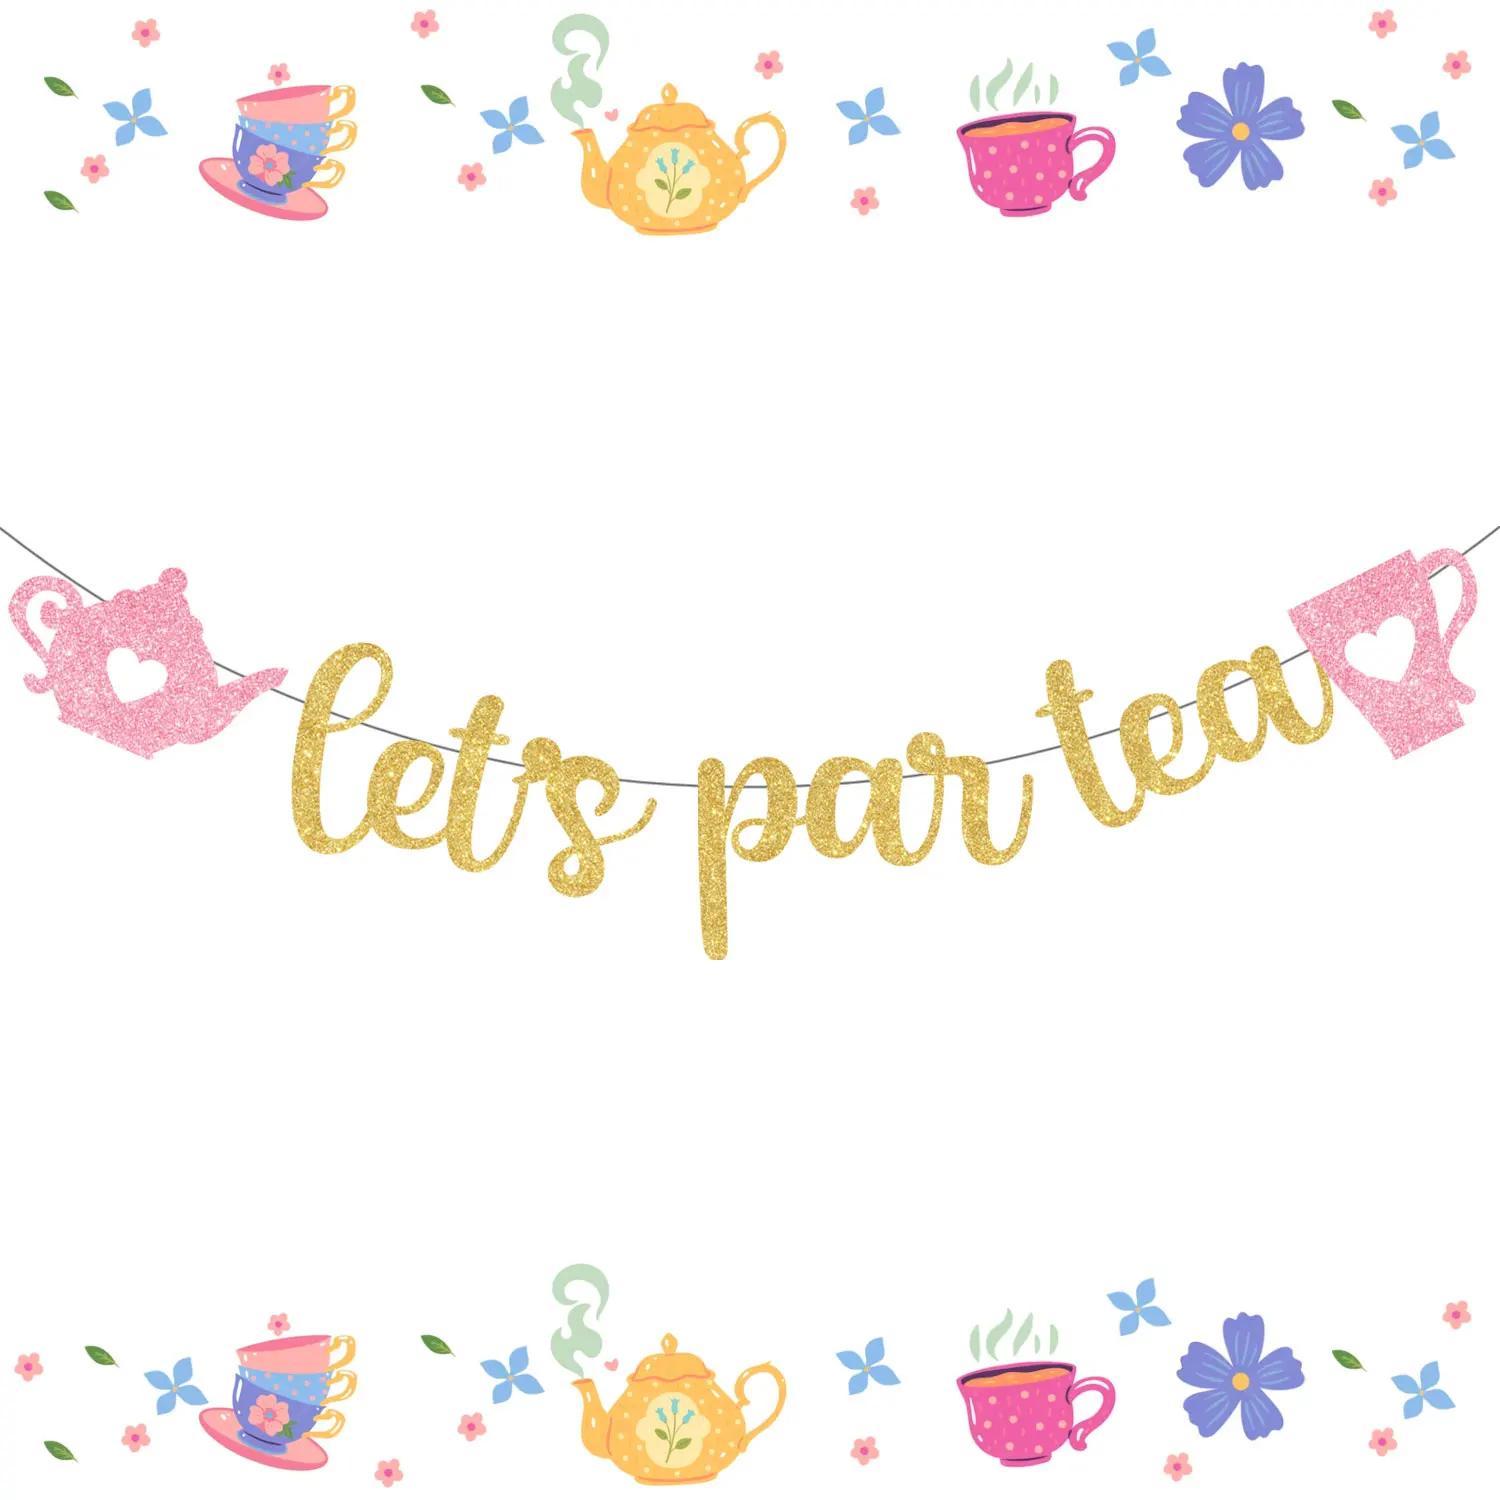 

Let's Par Tea Banner Tea Party Decorations Teapot and Teacup Garland for Tea Themed Birthday Party Bridal Shower Decorations